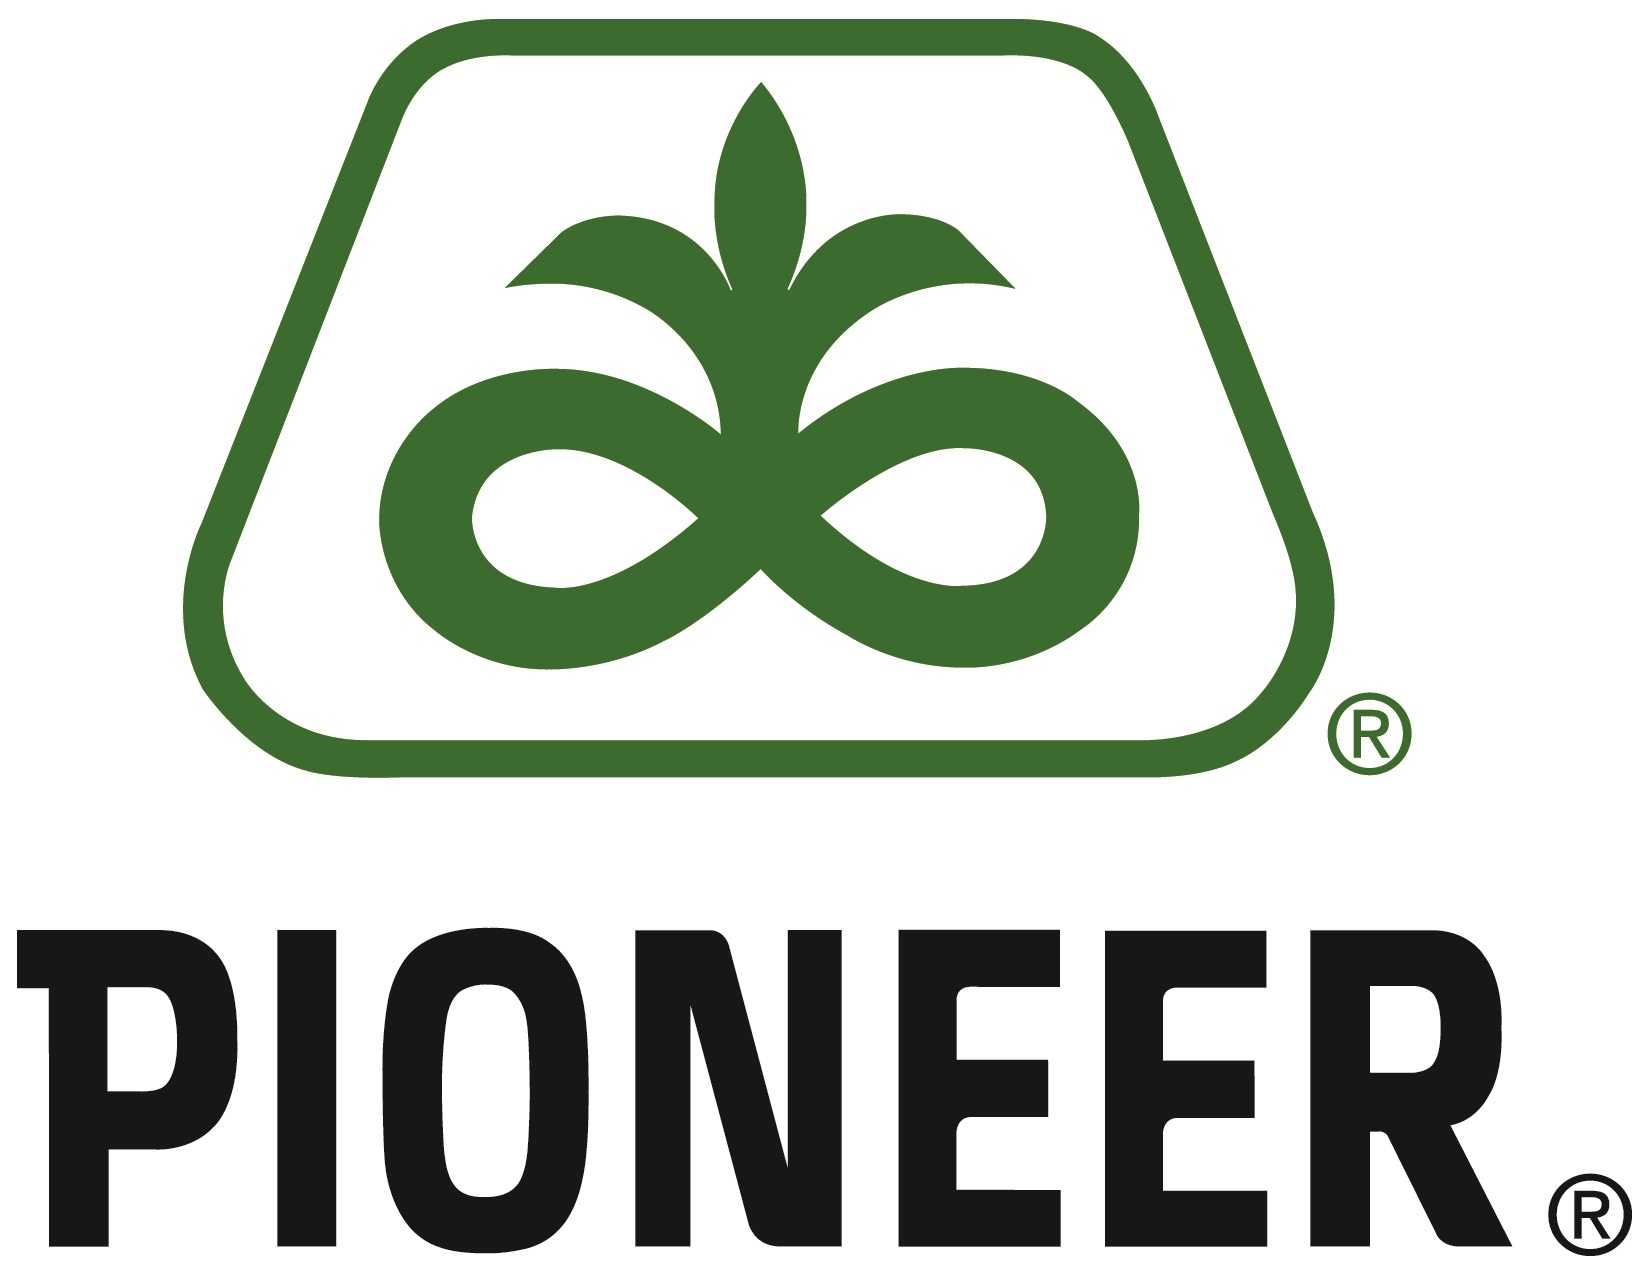 Green Pioneer Logo   Pluspng - Pioneer, Transparent background PNG HD thumbnail